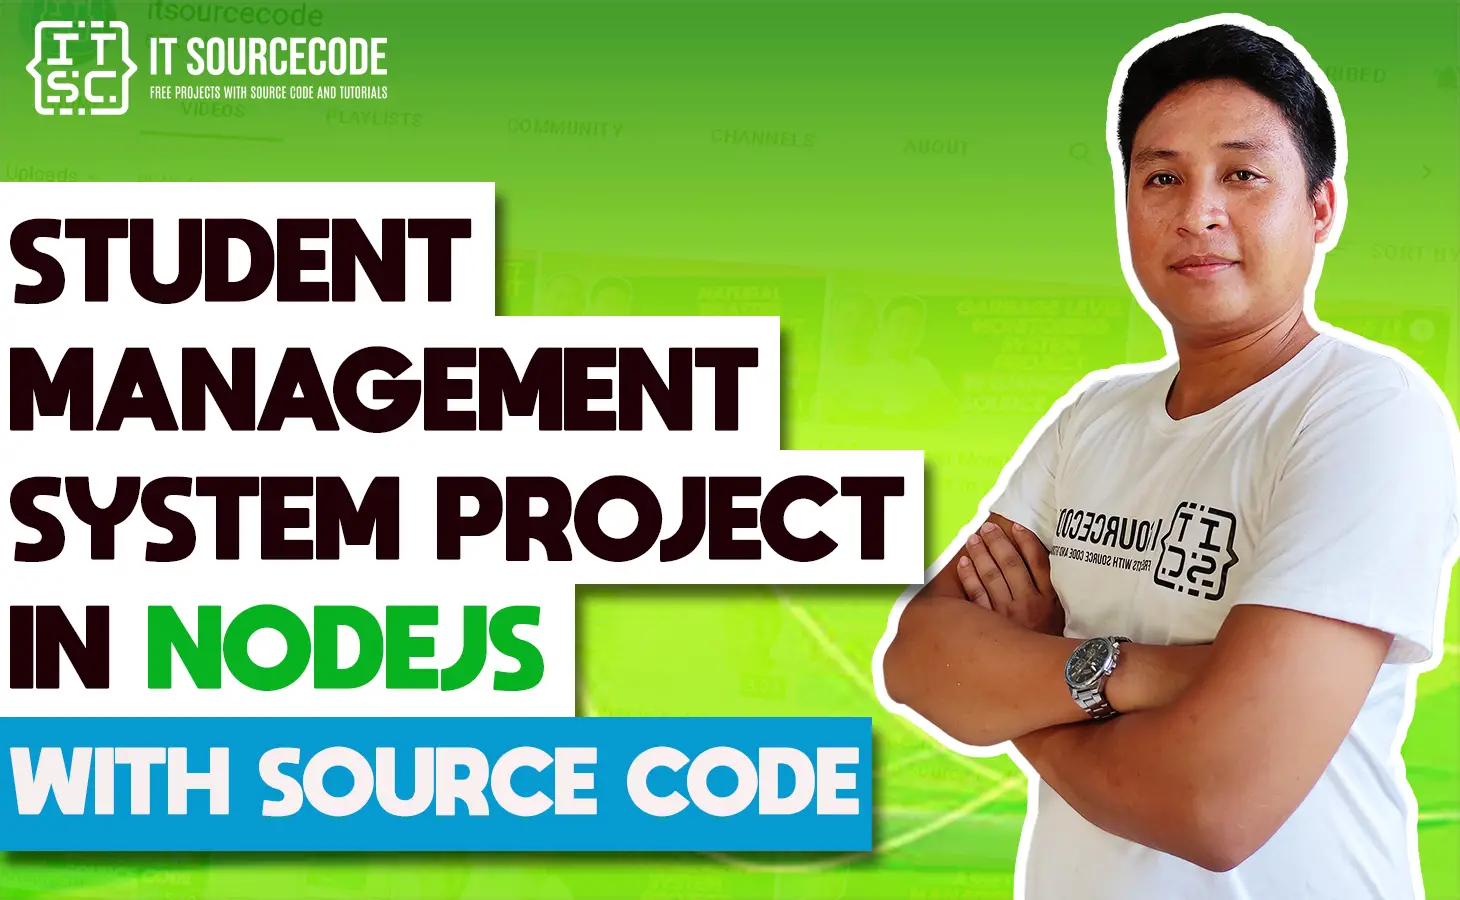 Student Management System Project in Node JS with Source Code